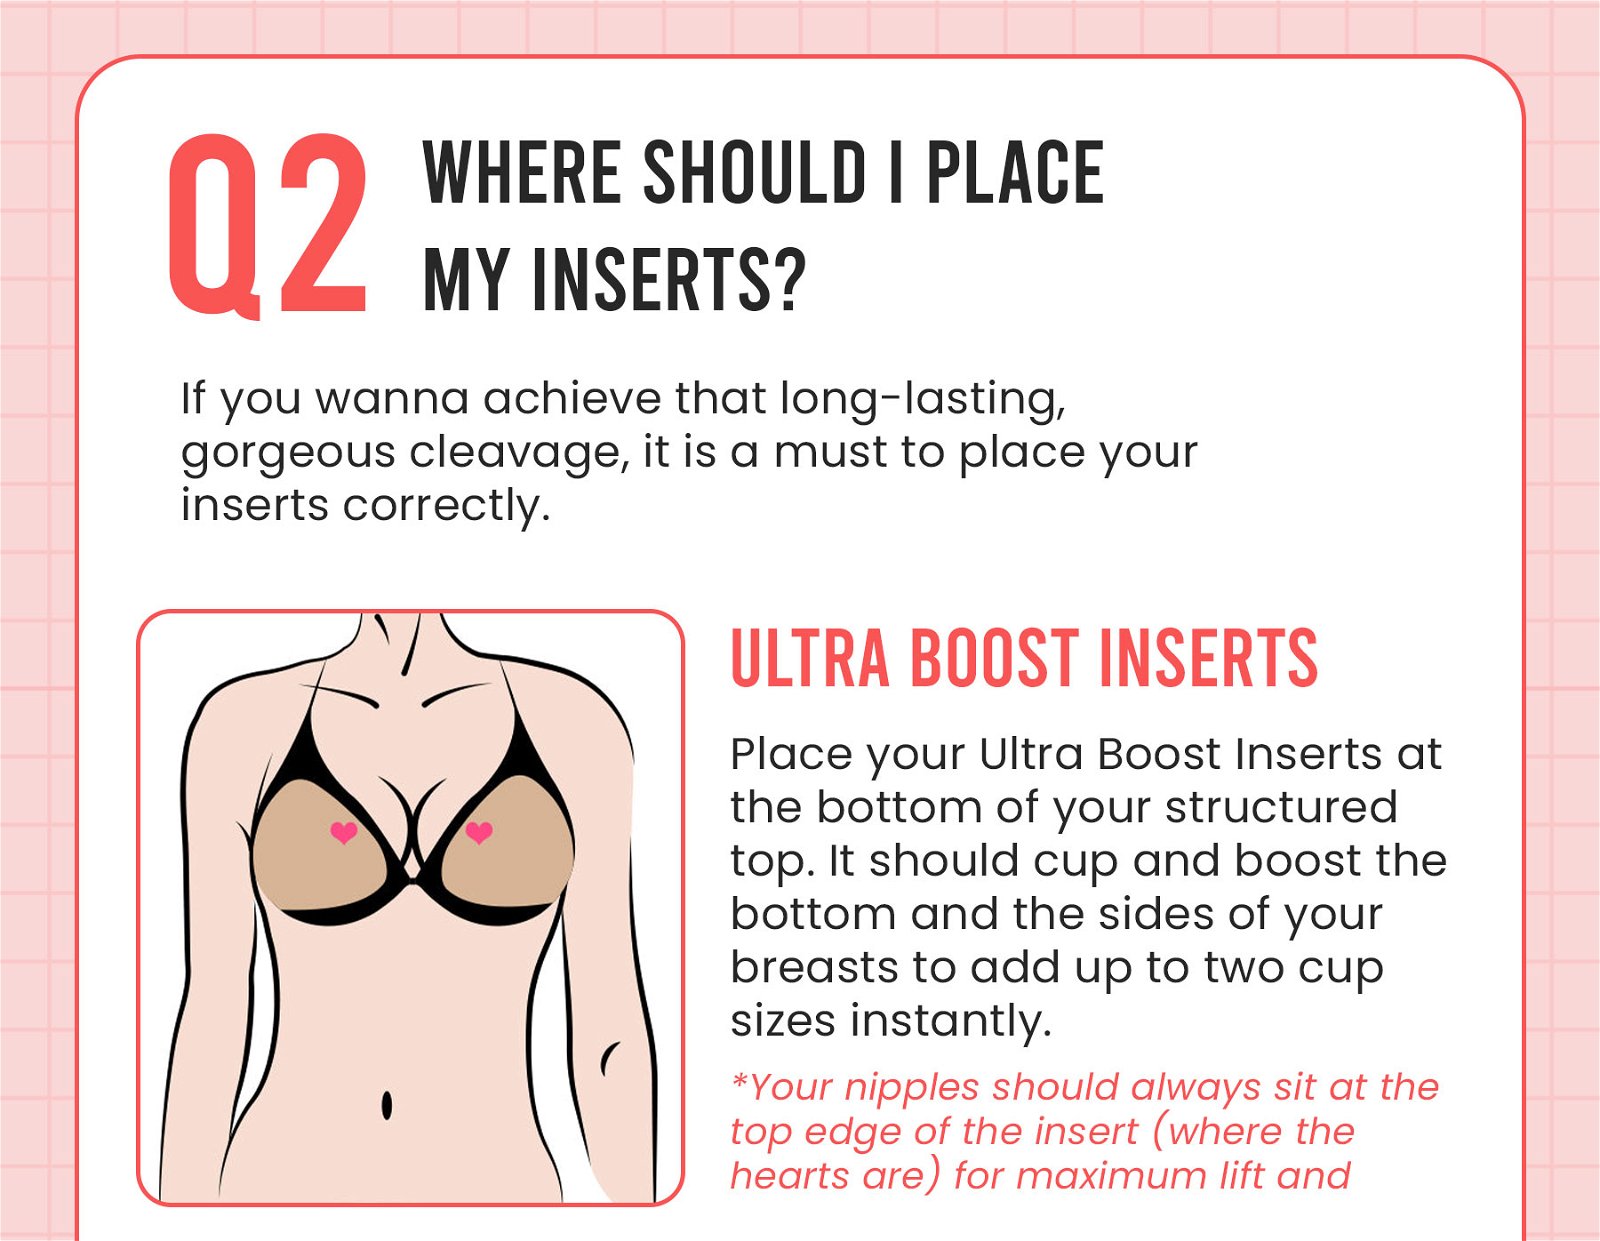 BOOMBA: Meet the inserts that *actually* boost 2 cup size!